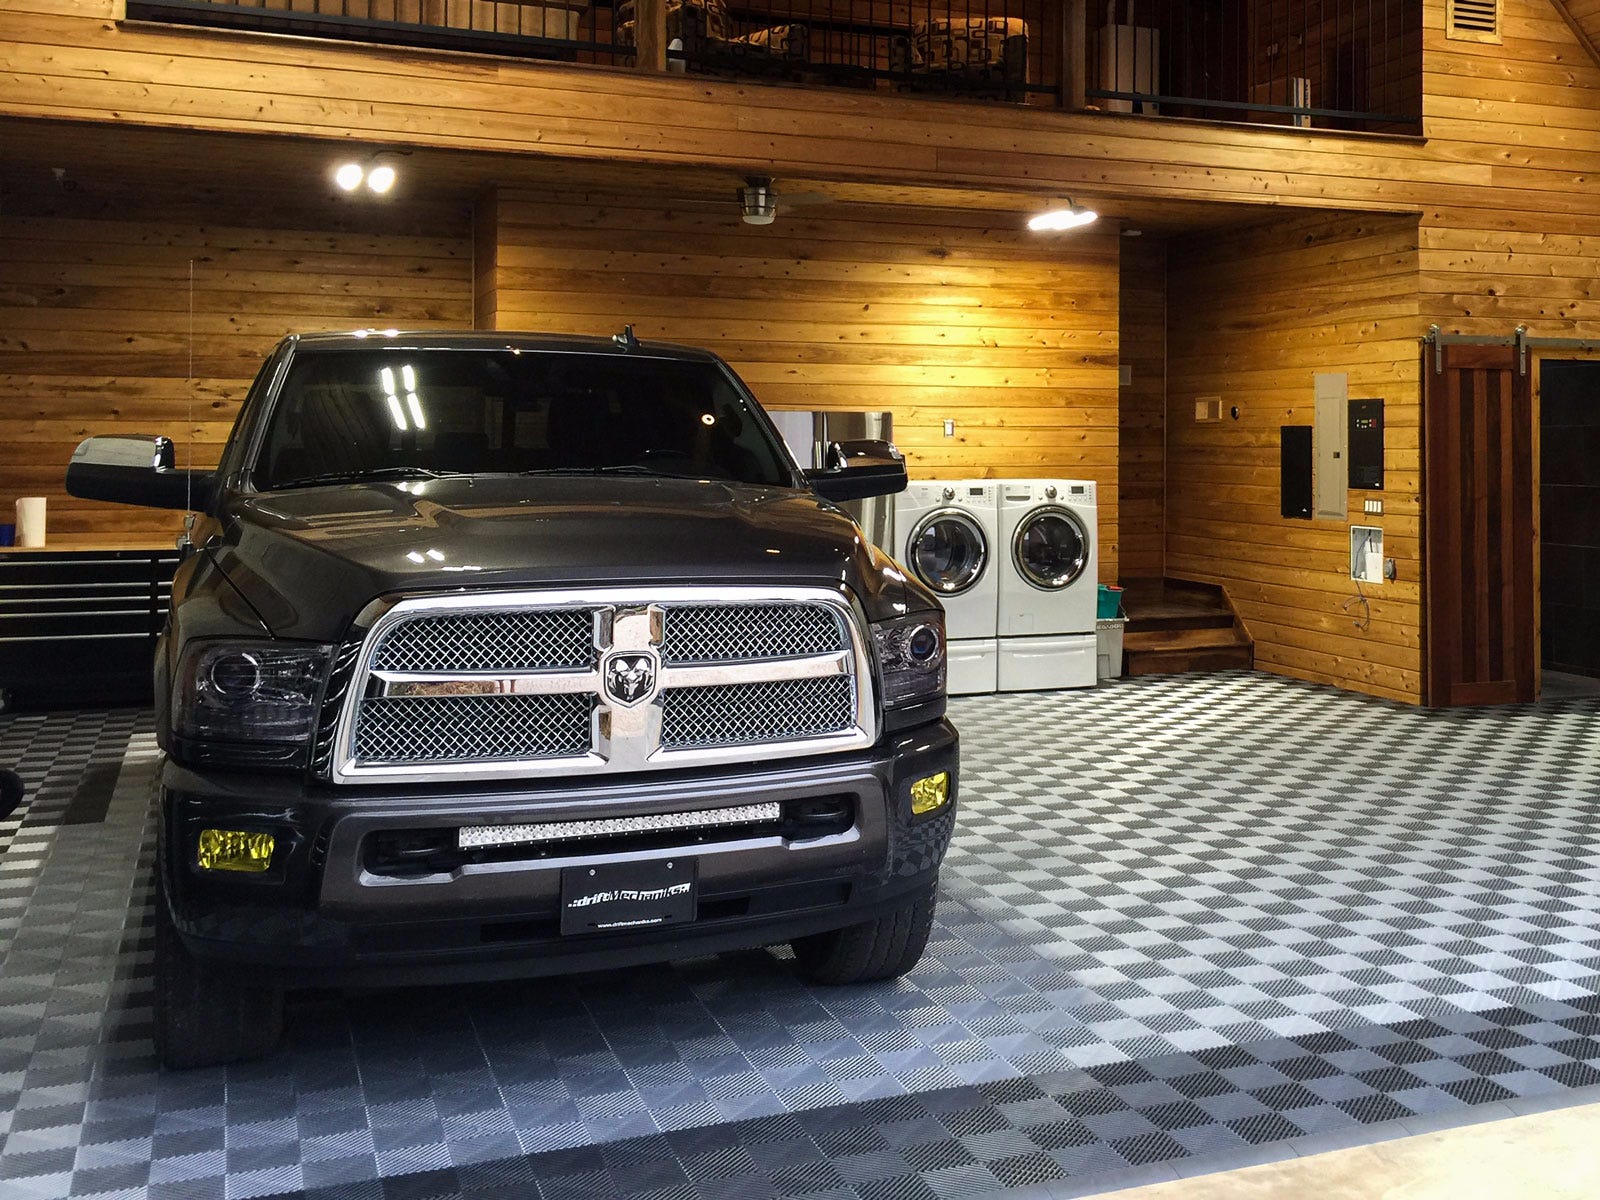 Why Racedeck Is The Perfect Heavy Duty Garage Flooring Solution